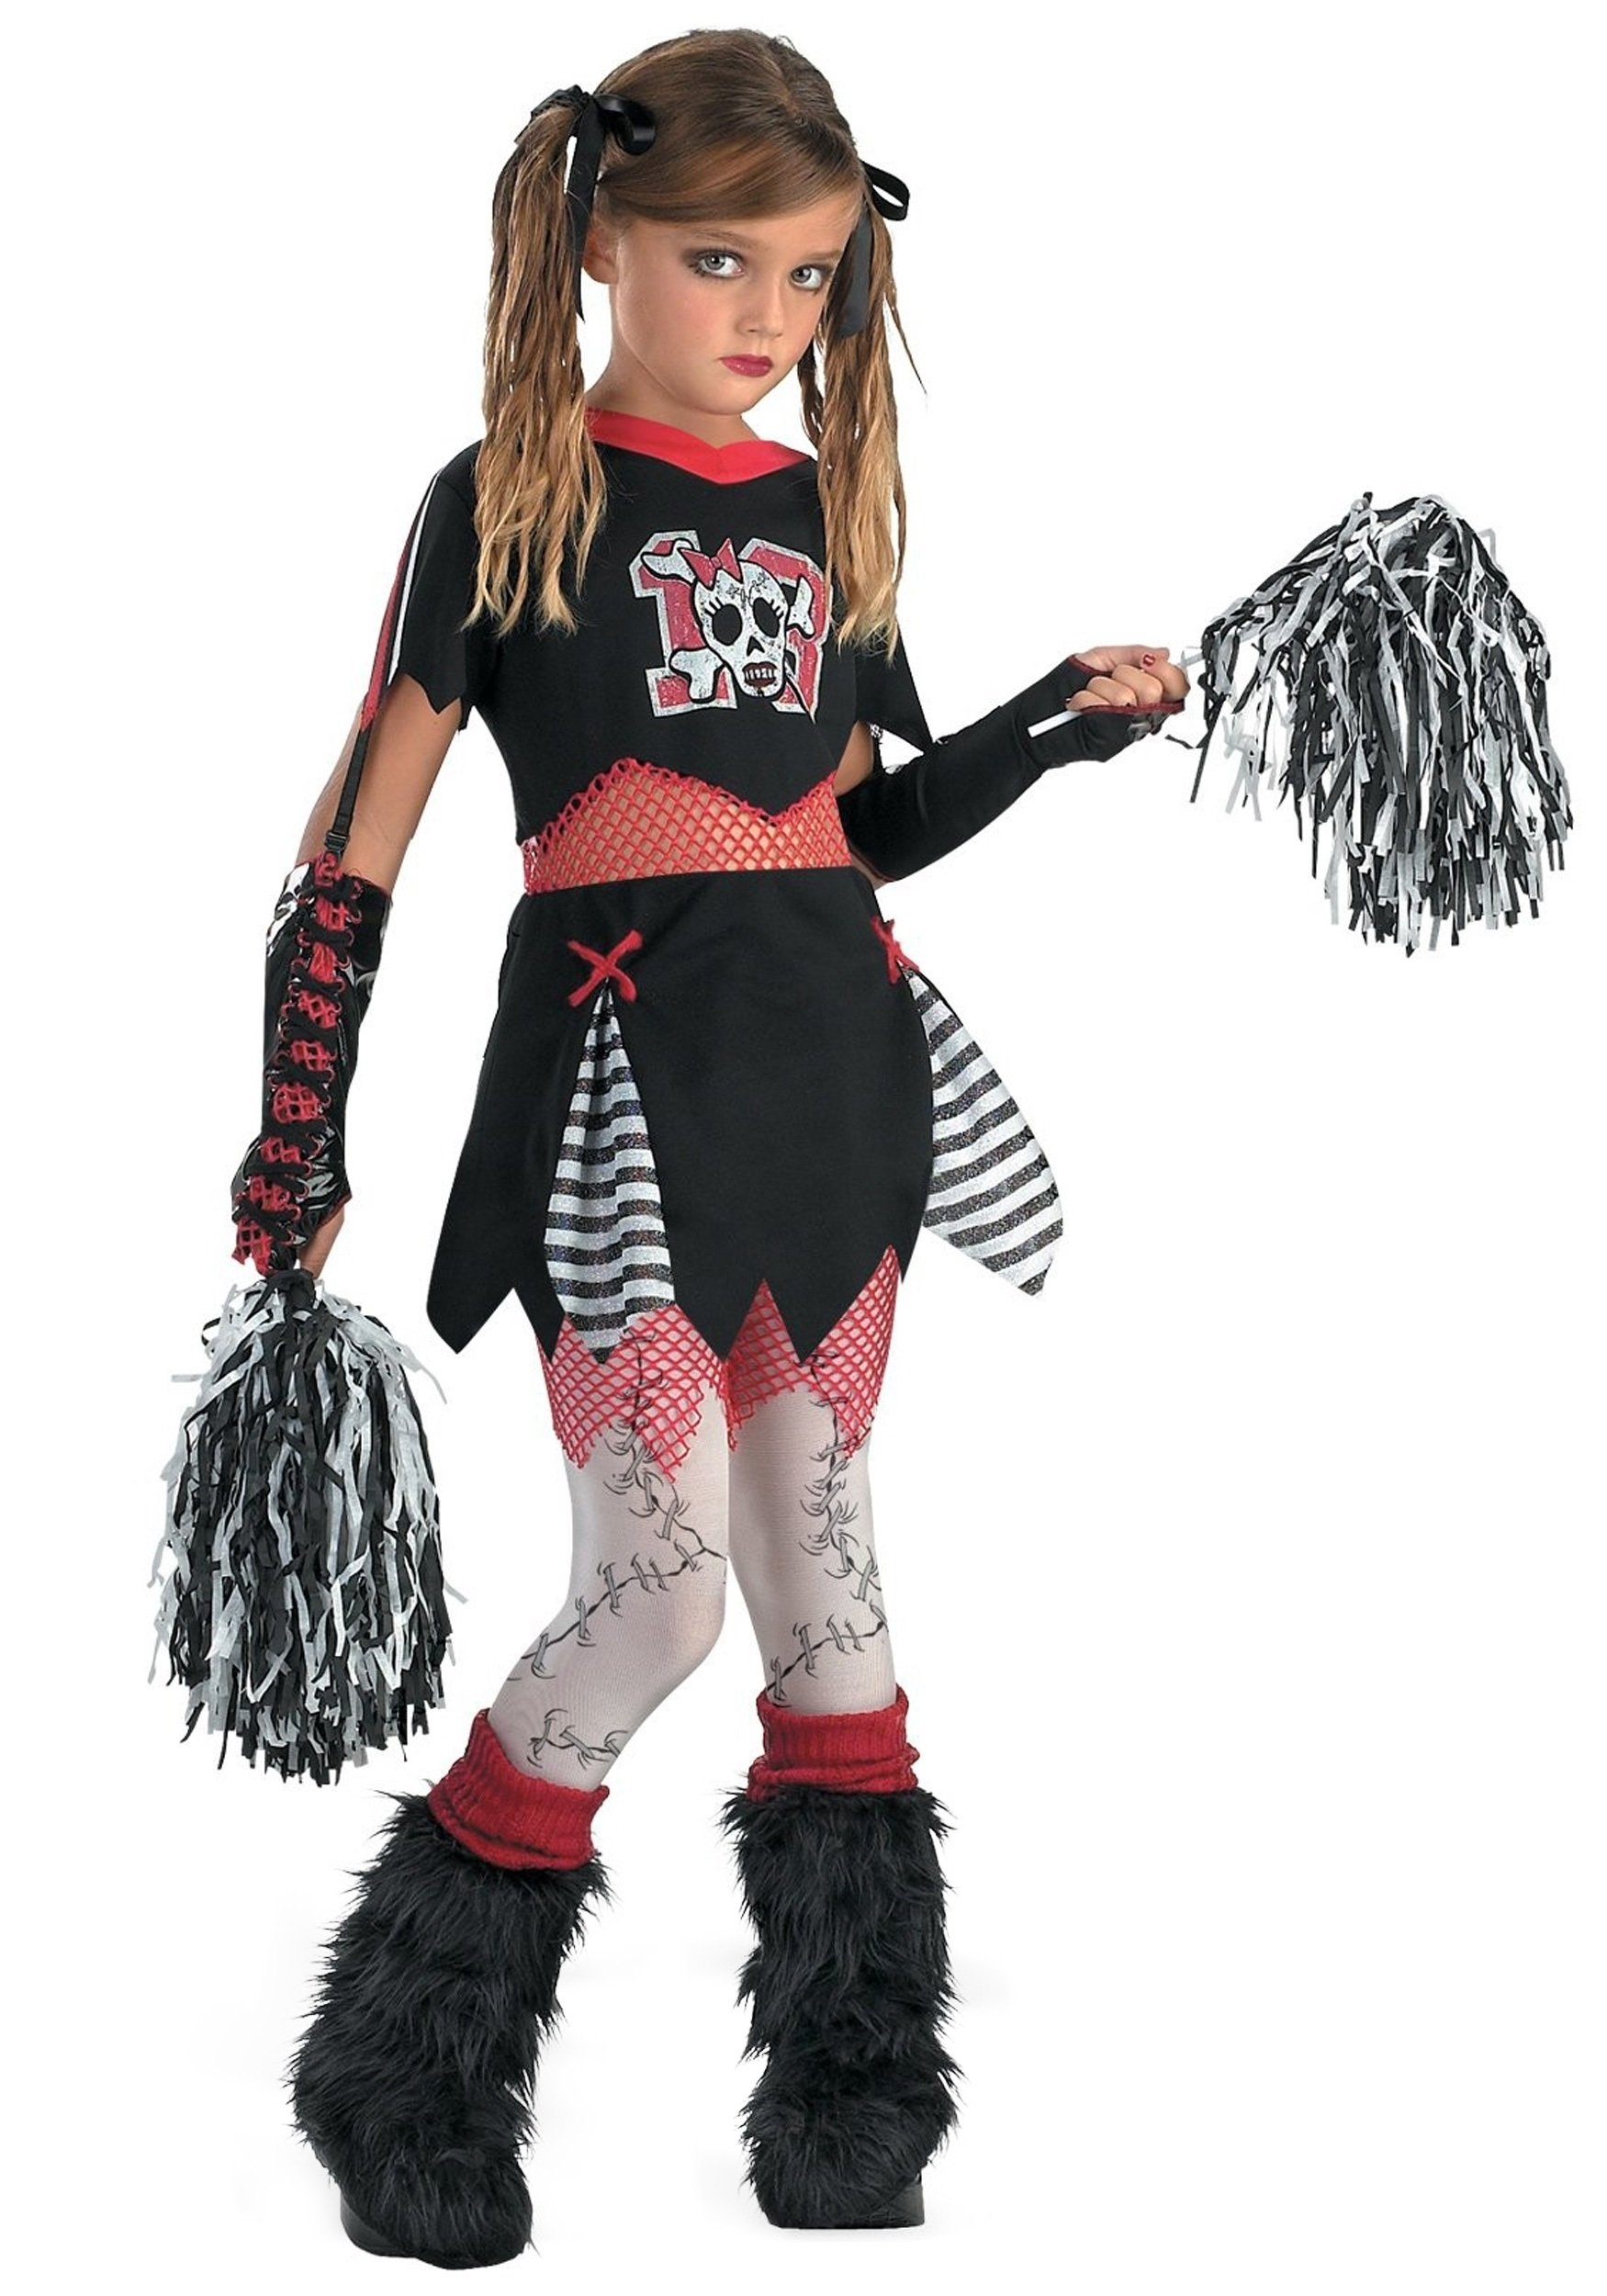 10 Unique Halloween Costume Ideas For Girls Age 10 child gothic cheerleader costume girls scary halloween costumes 2022